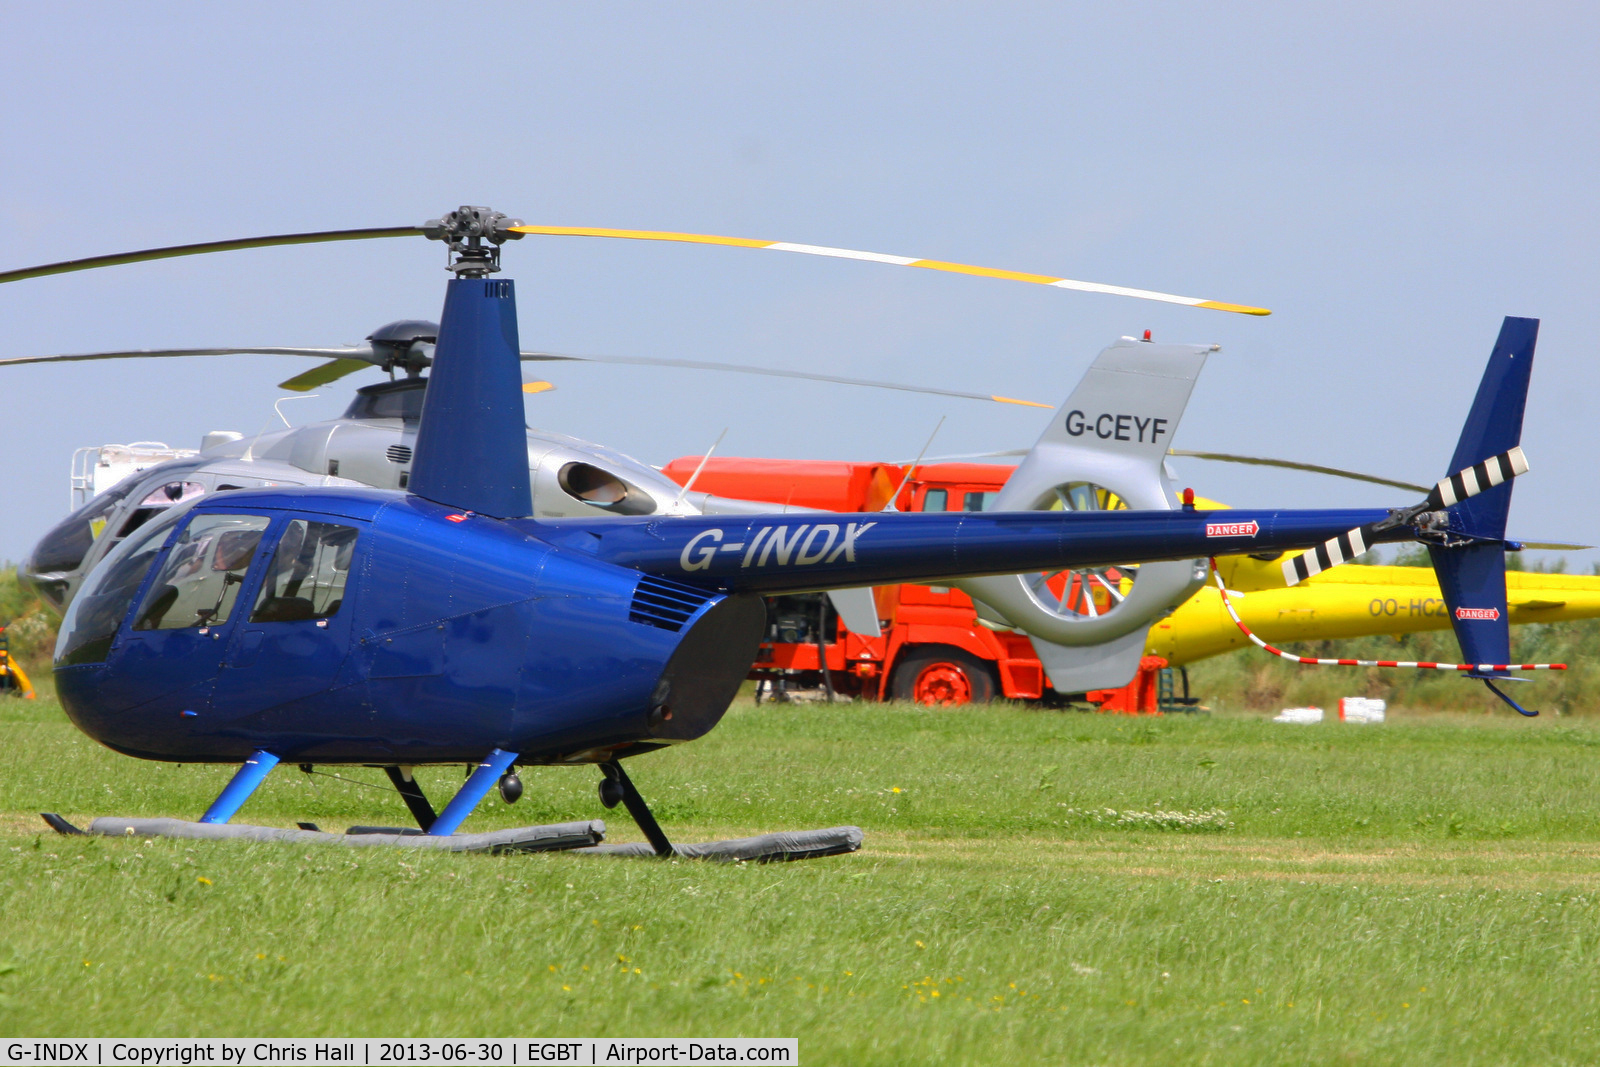 G-INDX, 2004 Robinson R44 Clipper II C/N 10491, being used for ferrying race fans to the British F1 Grand Prix at Silverstone